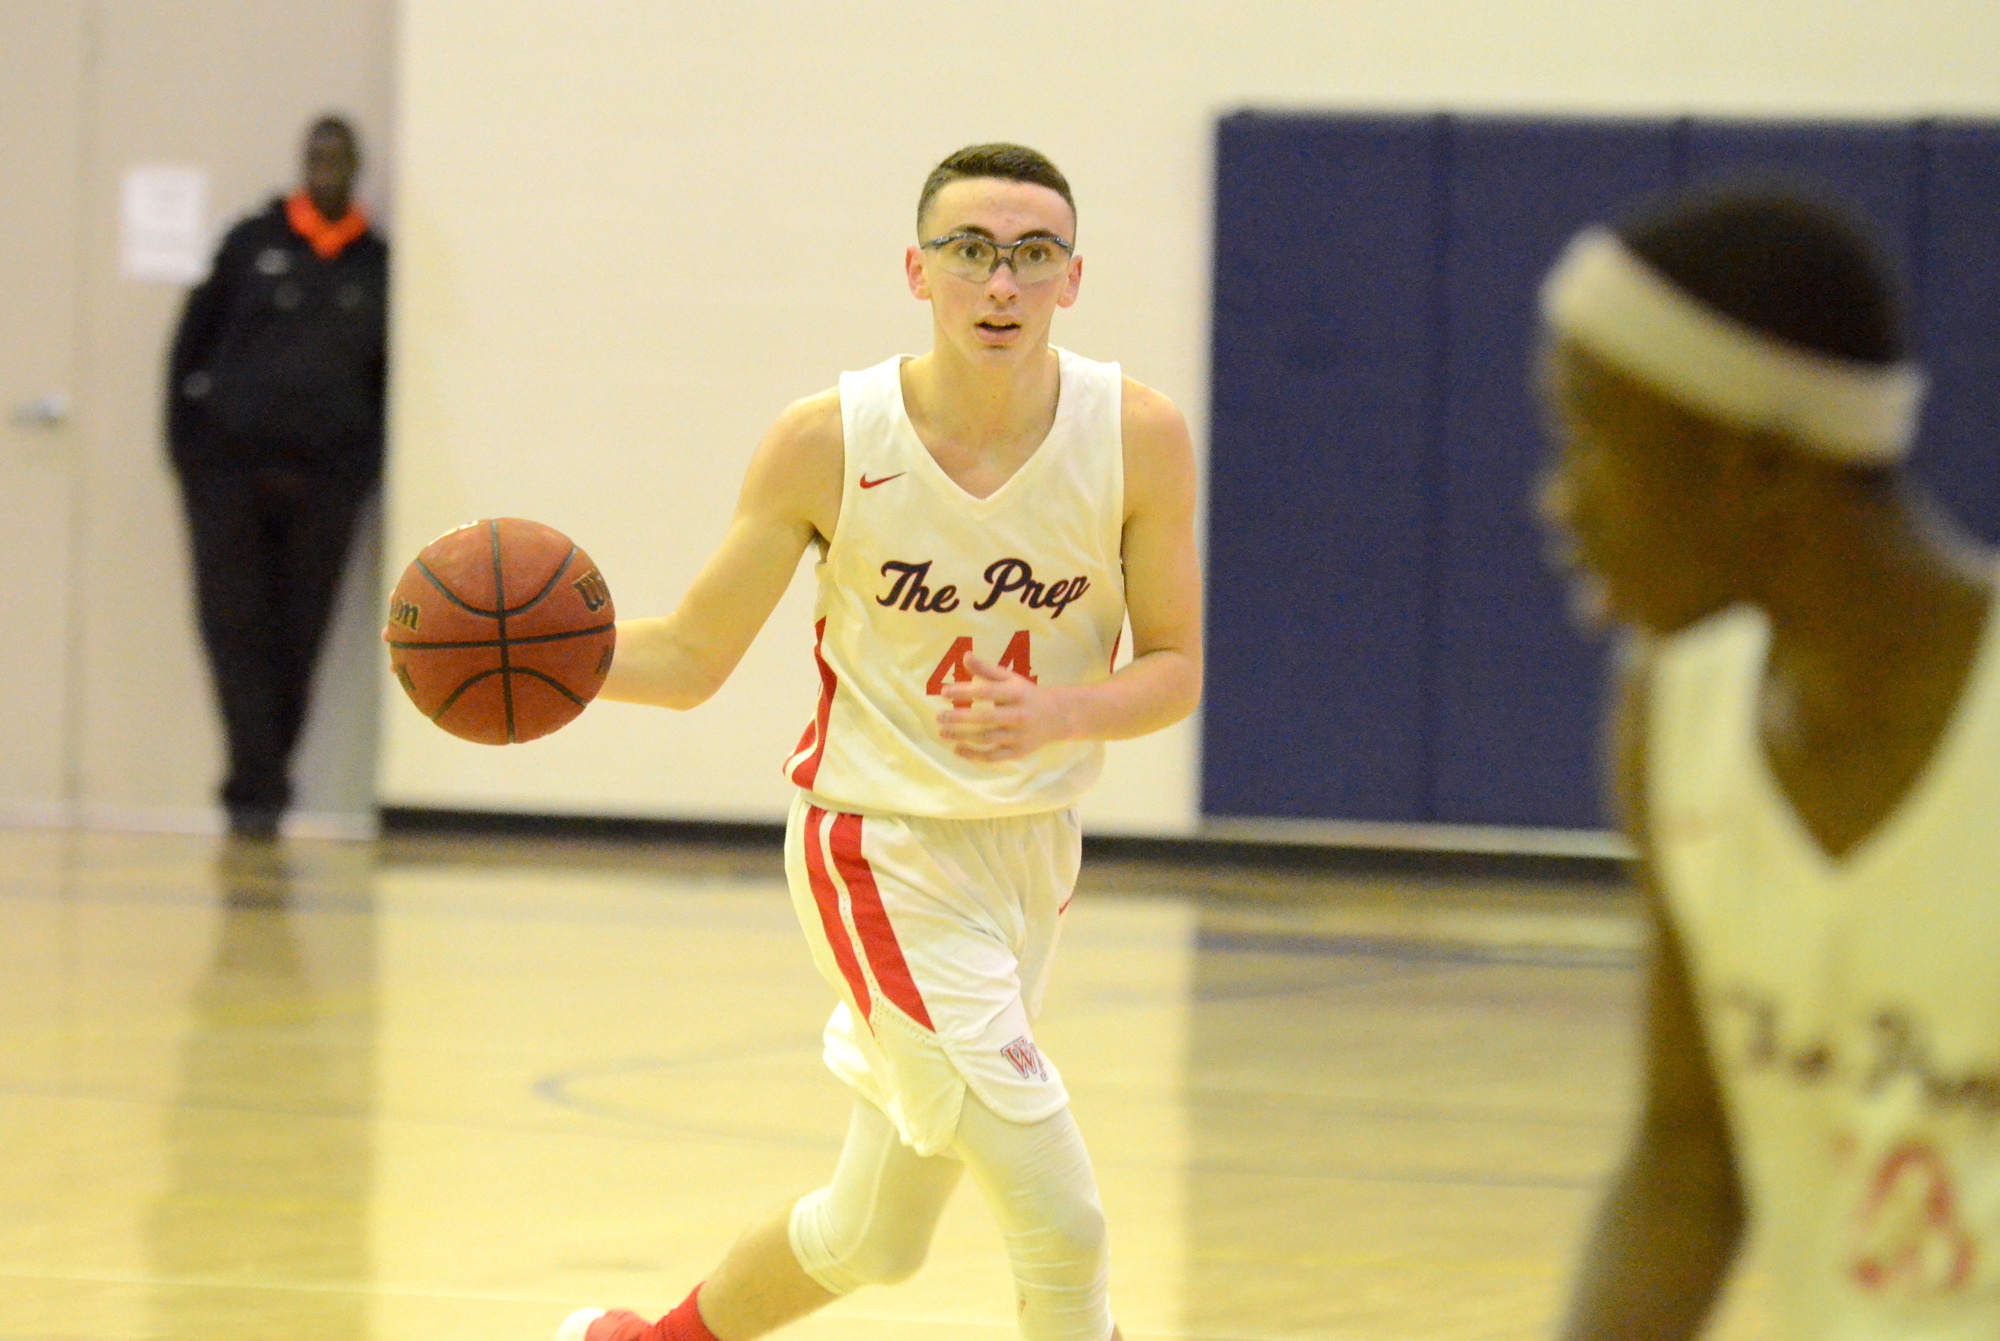 Michael Gavin scored 21 points for the Lakers against TFA.